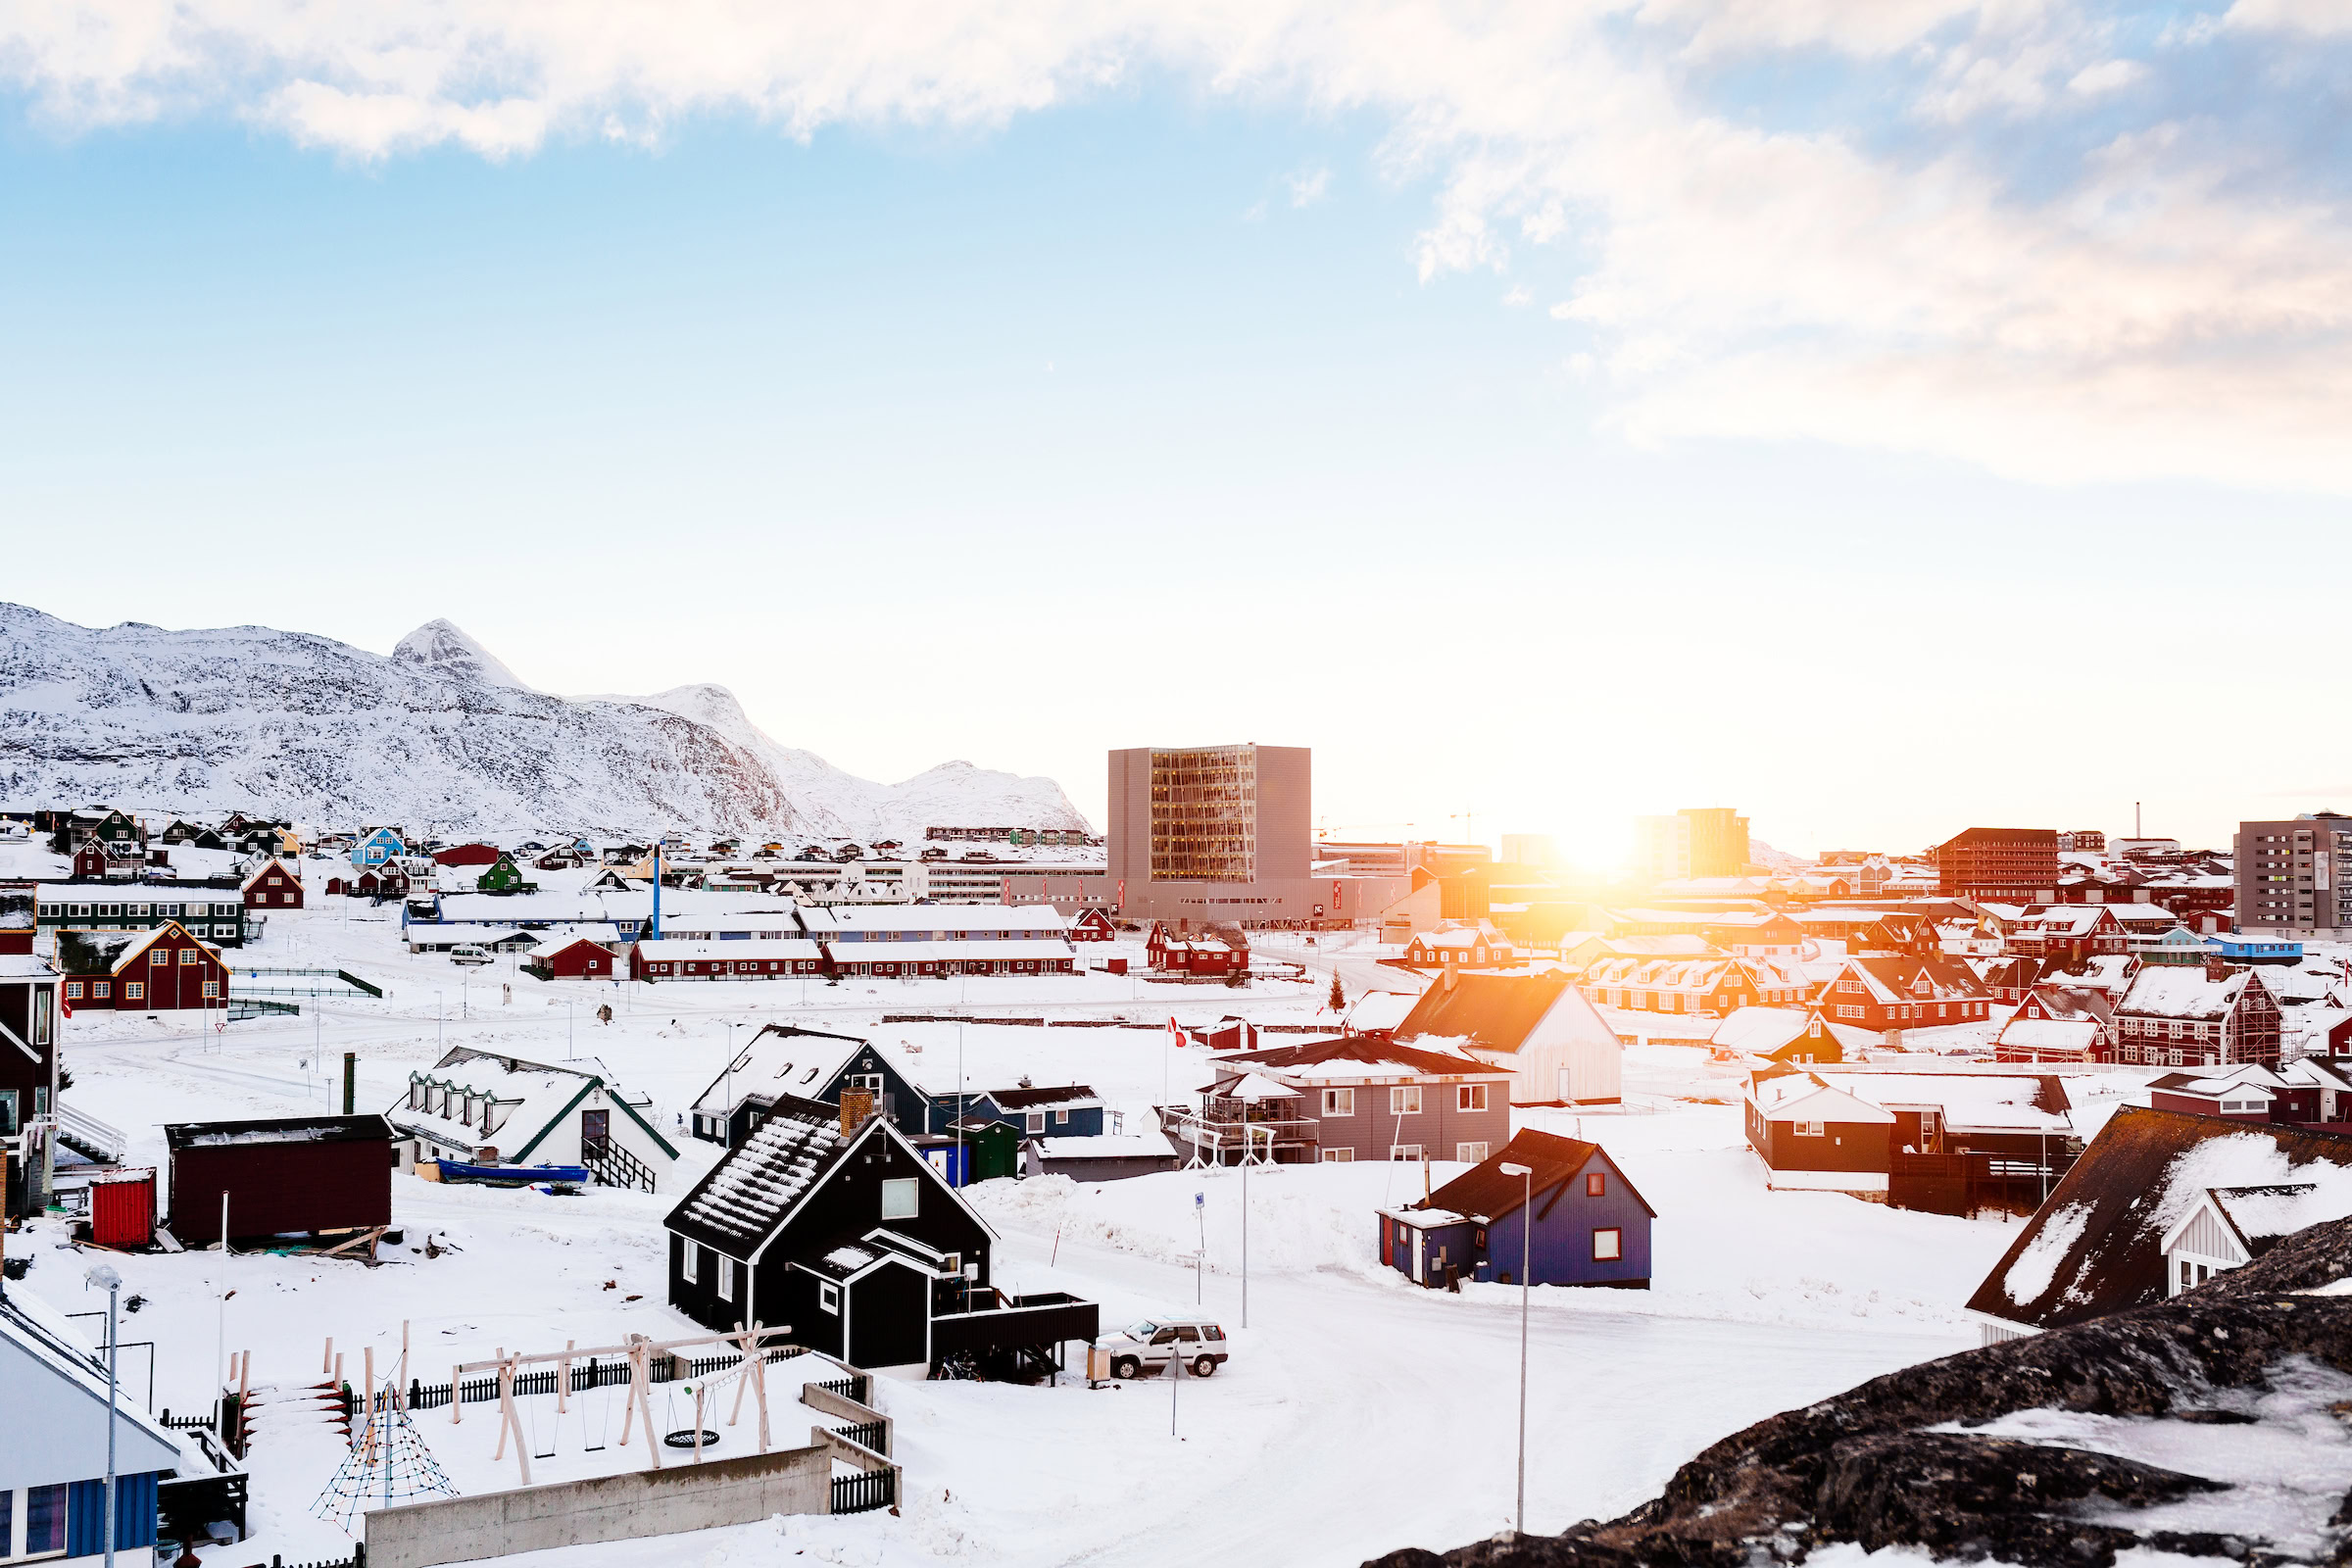 Sunrise over a snowcovered Nuuk in Greenland. Photo by Rebecca Gustafsson - Visit Greenland